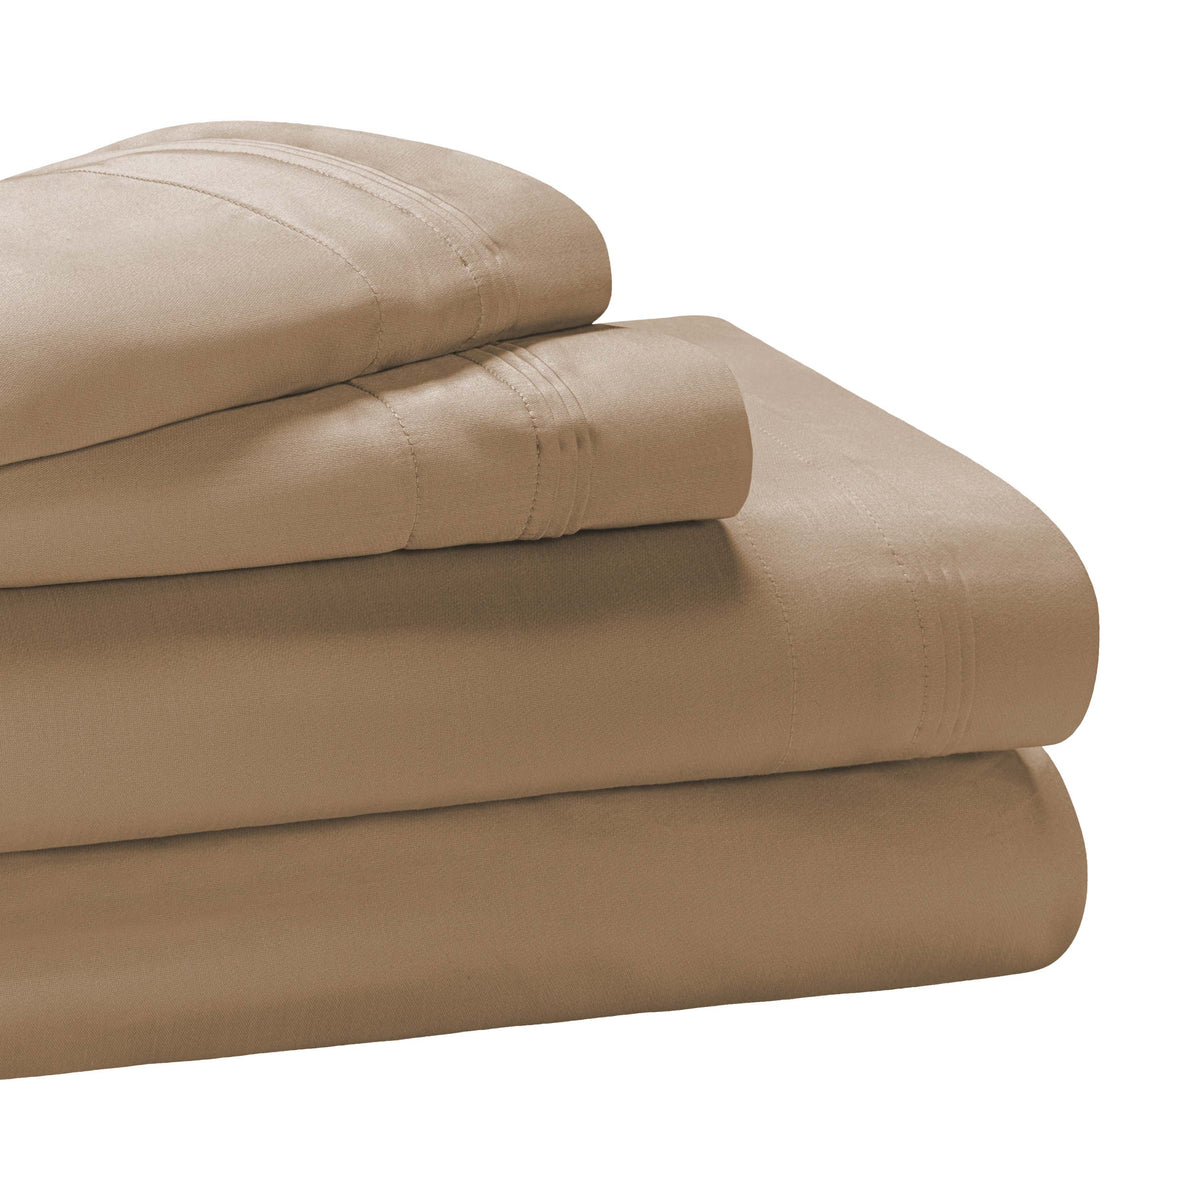 Superior Premium 650 Thread Count Egyptian Cotton Solid Deep Pocket Sheet Set - Taupe